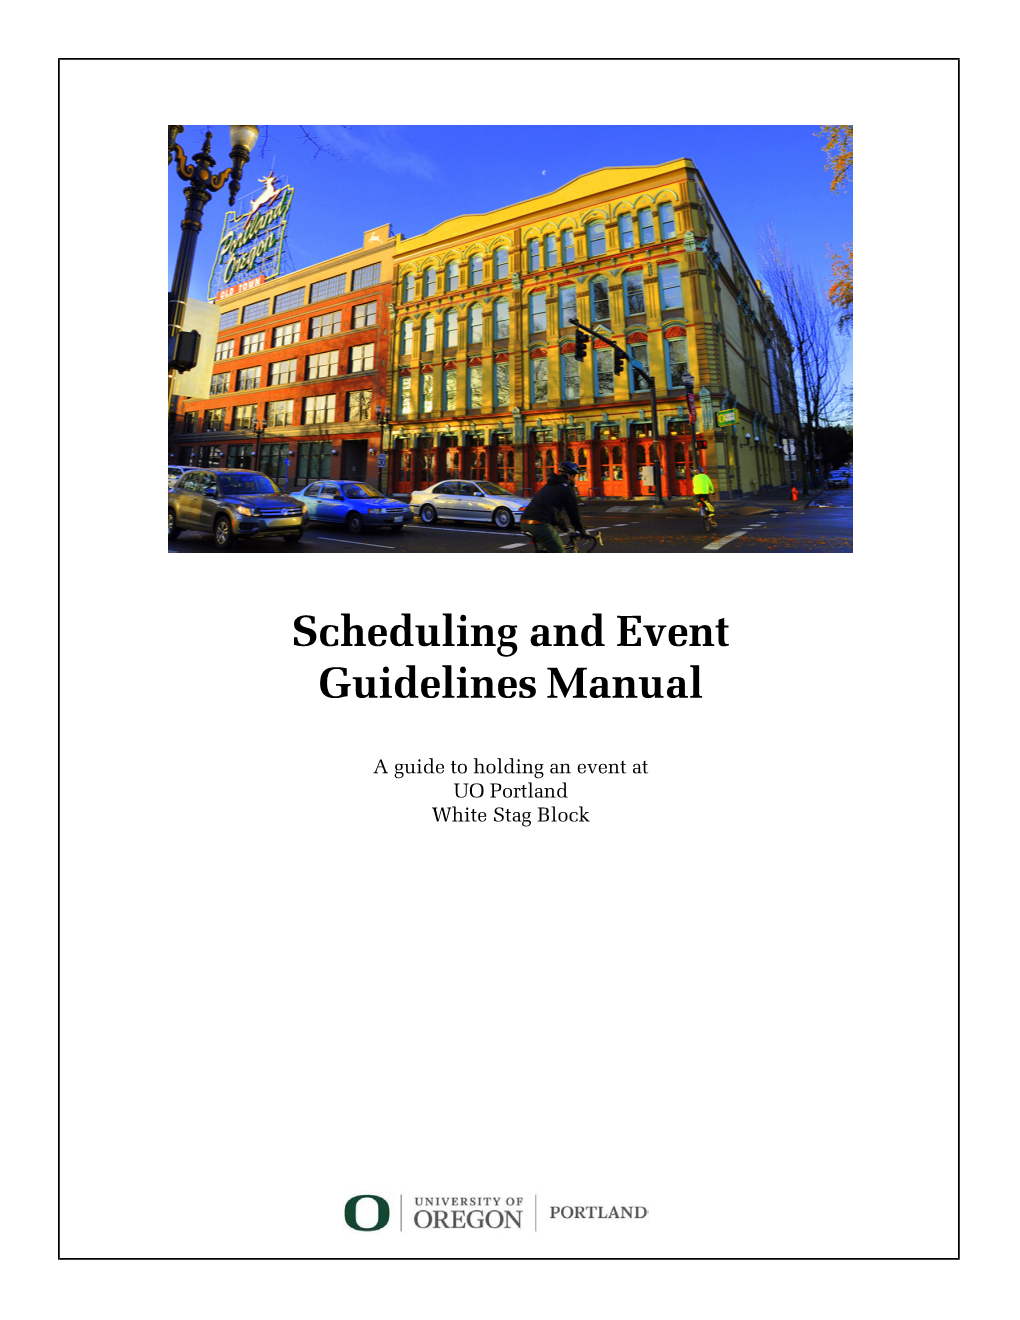 Scheduling and Event Guidelines Manual